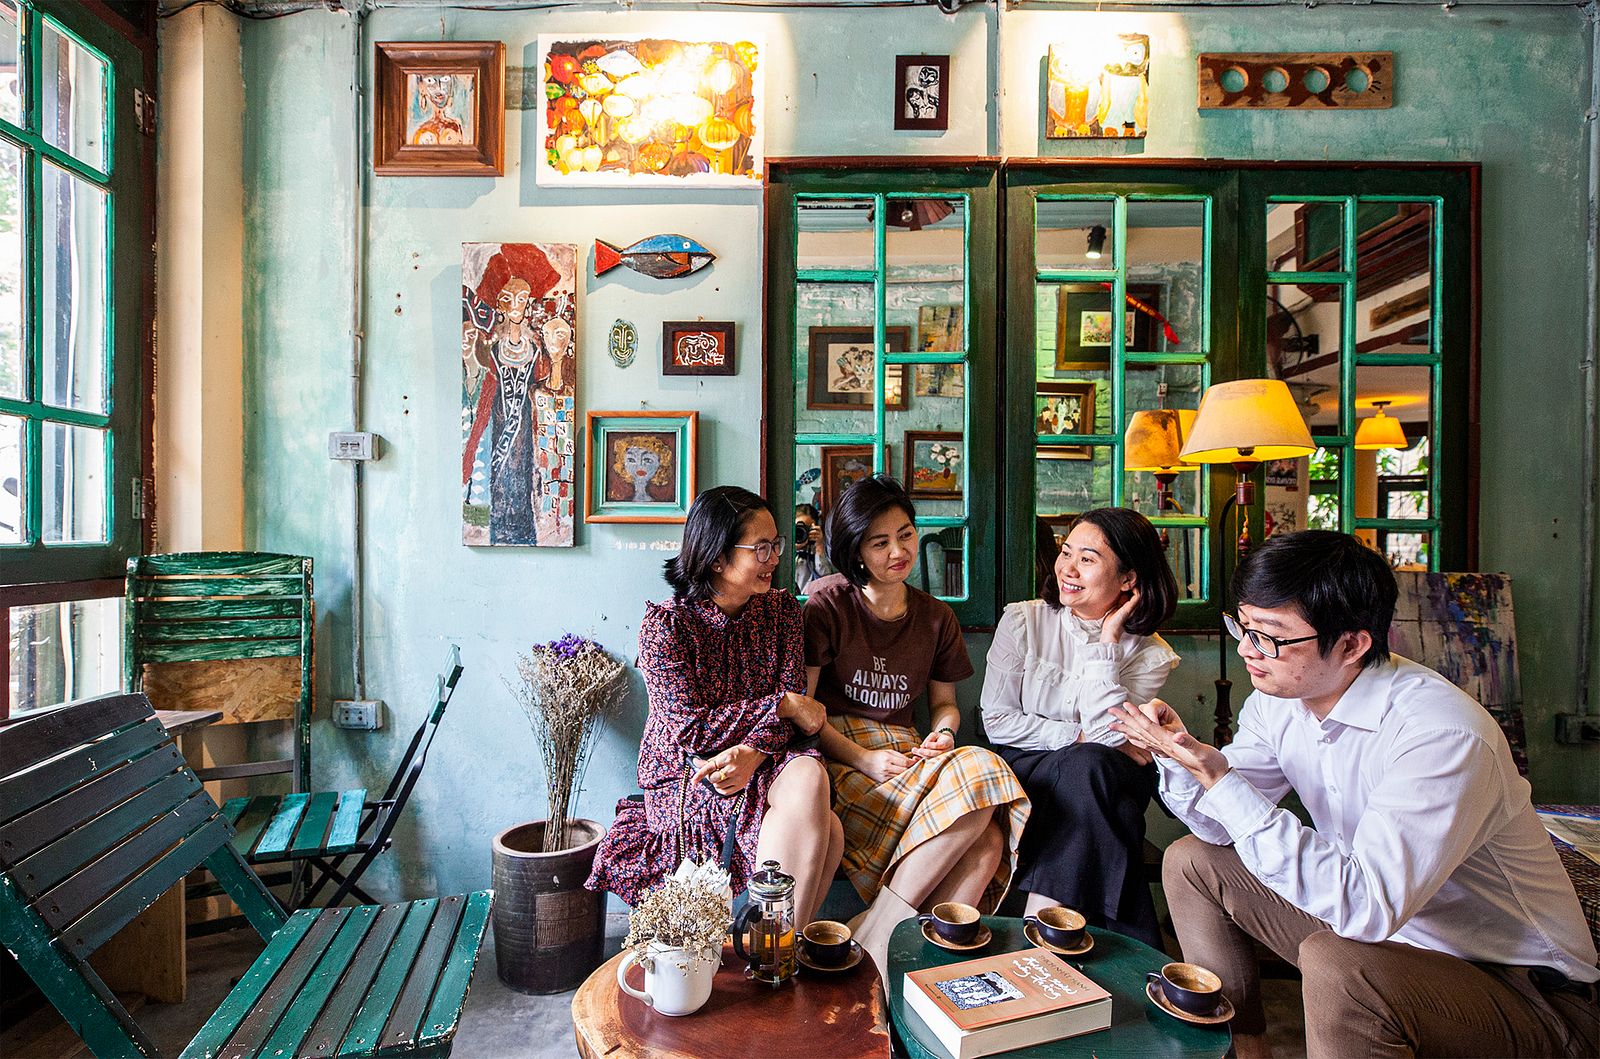 Kết quả hình ảnh cho Ngõ Nooks: Vegetarian Fusion Food, Artwork and Leafy Surrounds All Feature in This Urban Oasis